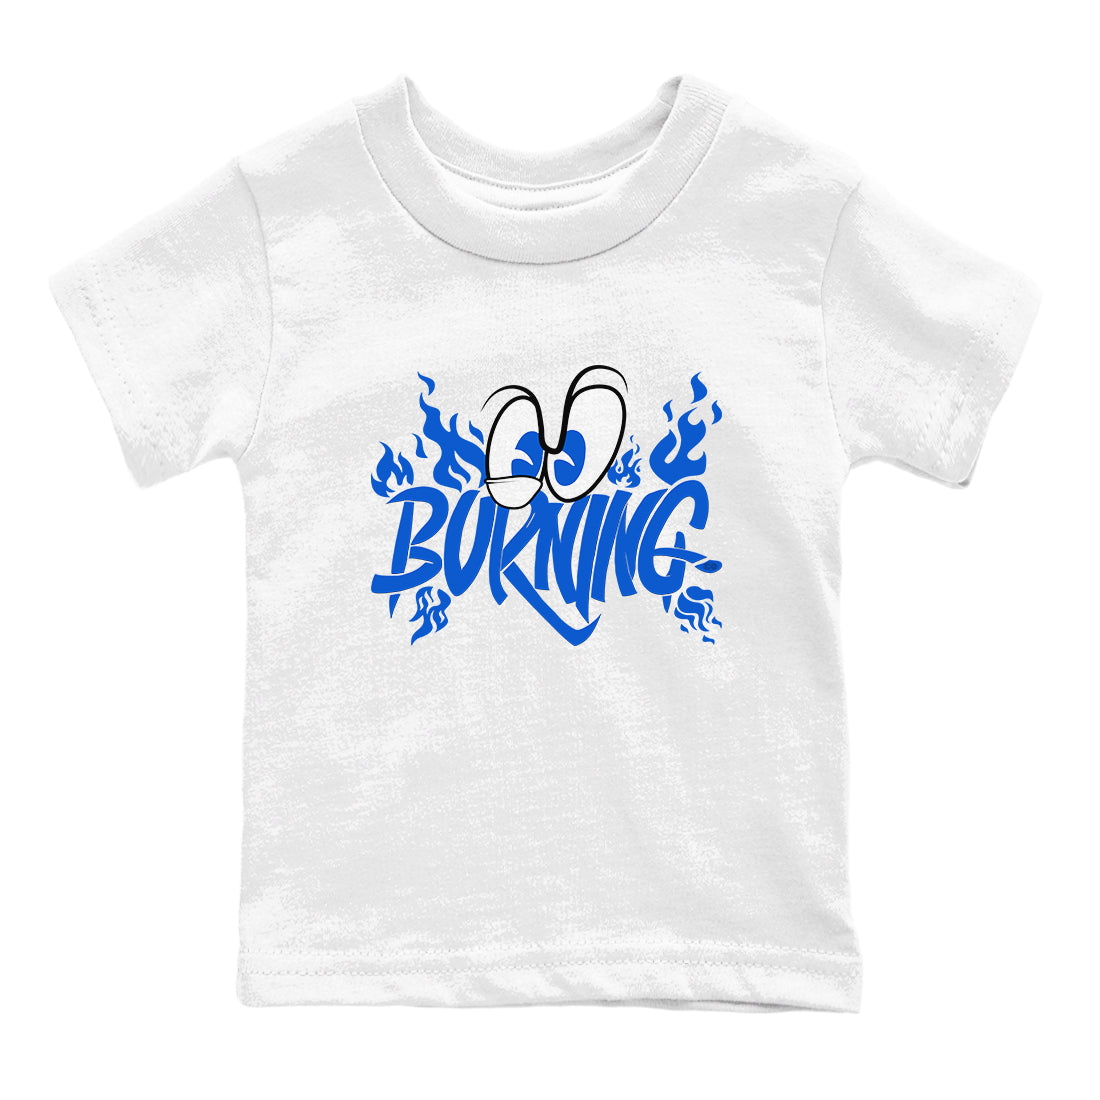 Yeezy Slide Azure shirts to match jordans Burning sneaker match tees Yeezy Slide Azure SNRT Sneaker Tees streetwear brand Baby and Youth White 2 cotton tee